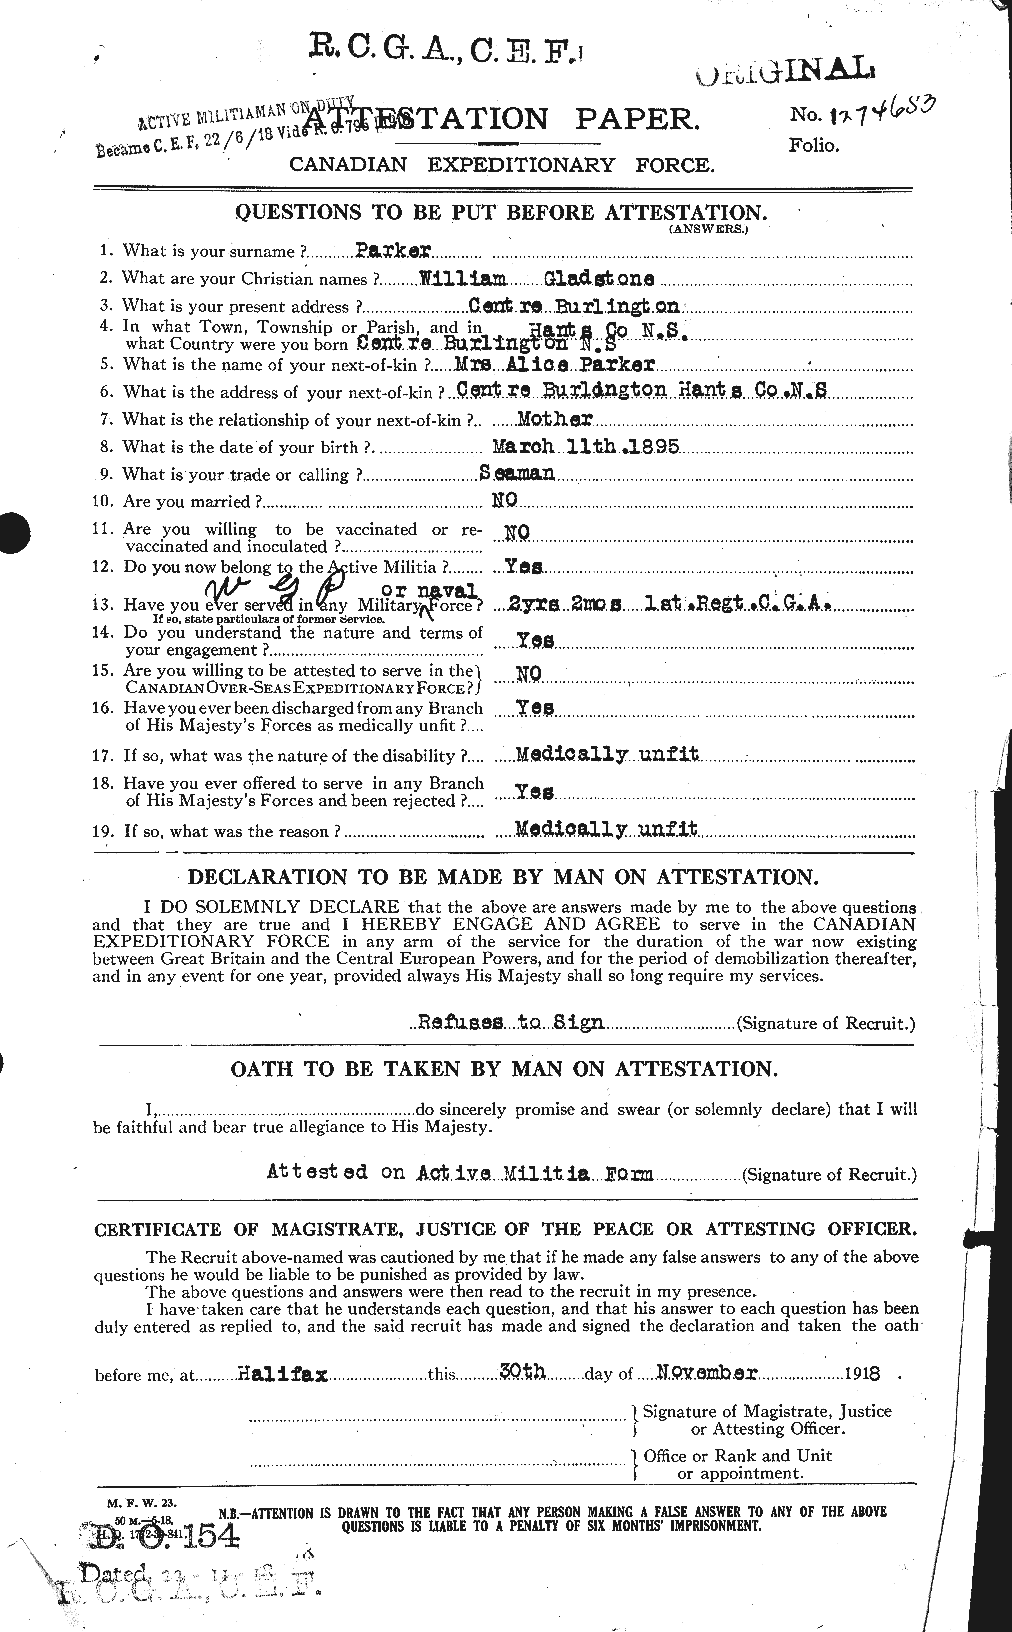 Personnel Records of the First World War - CEF 565747a